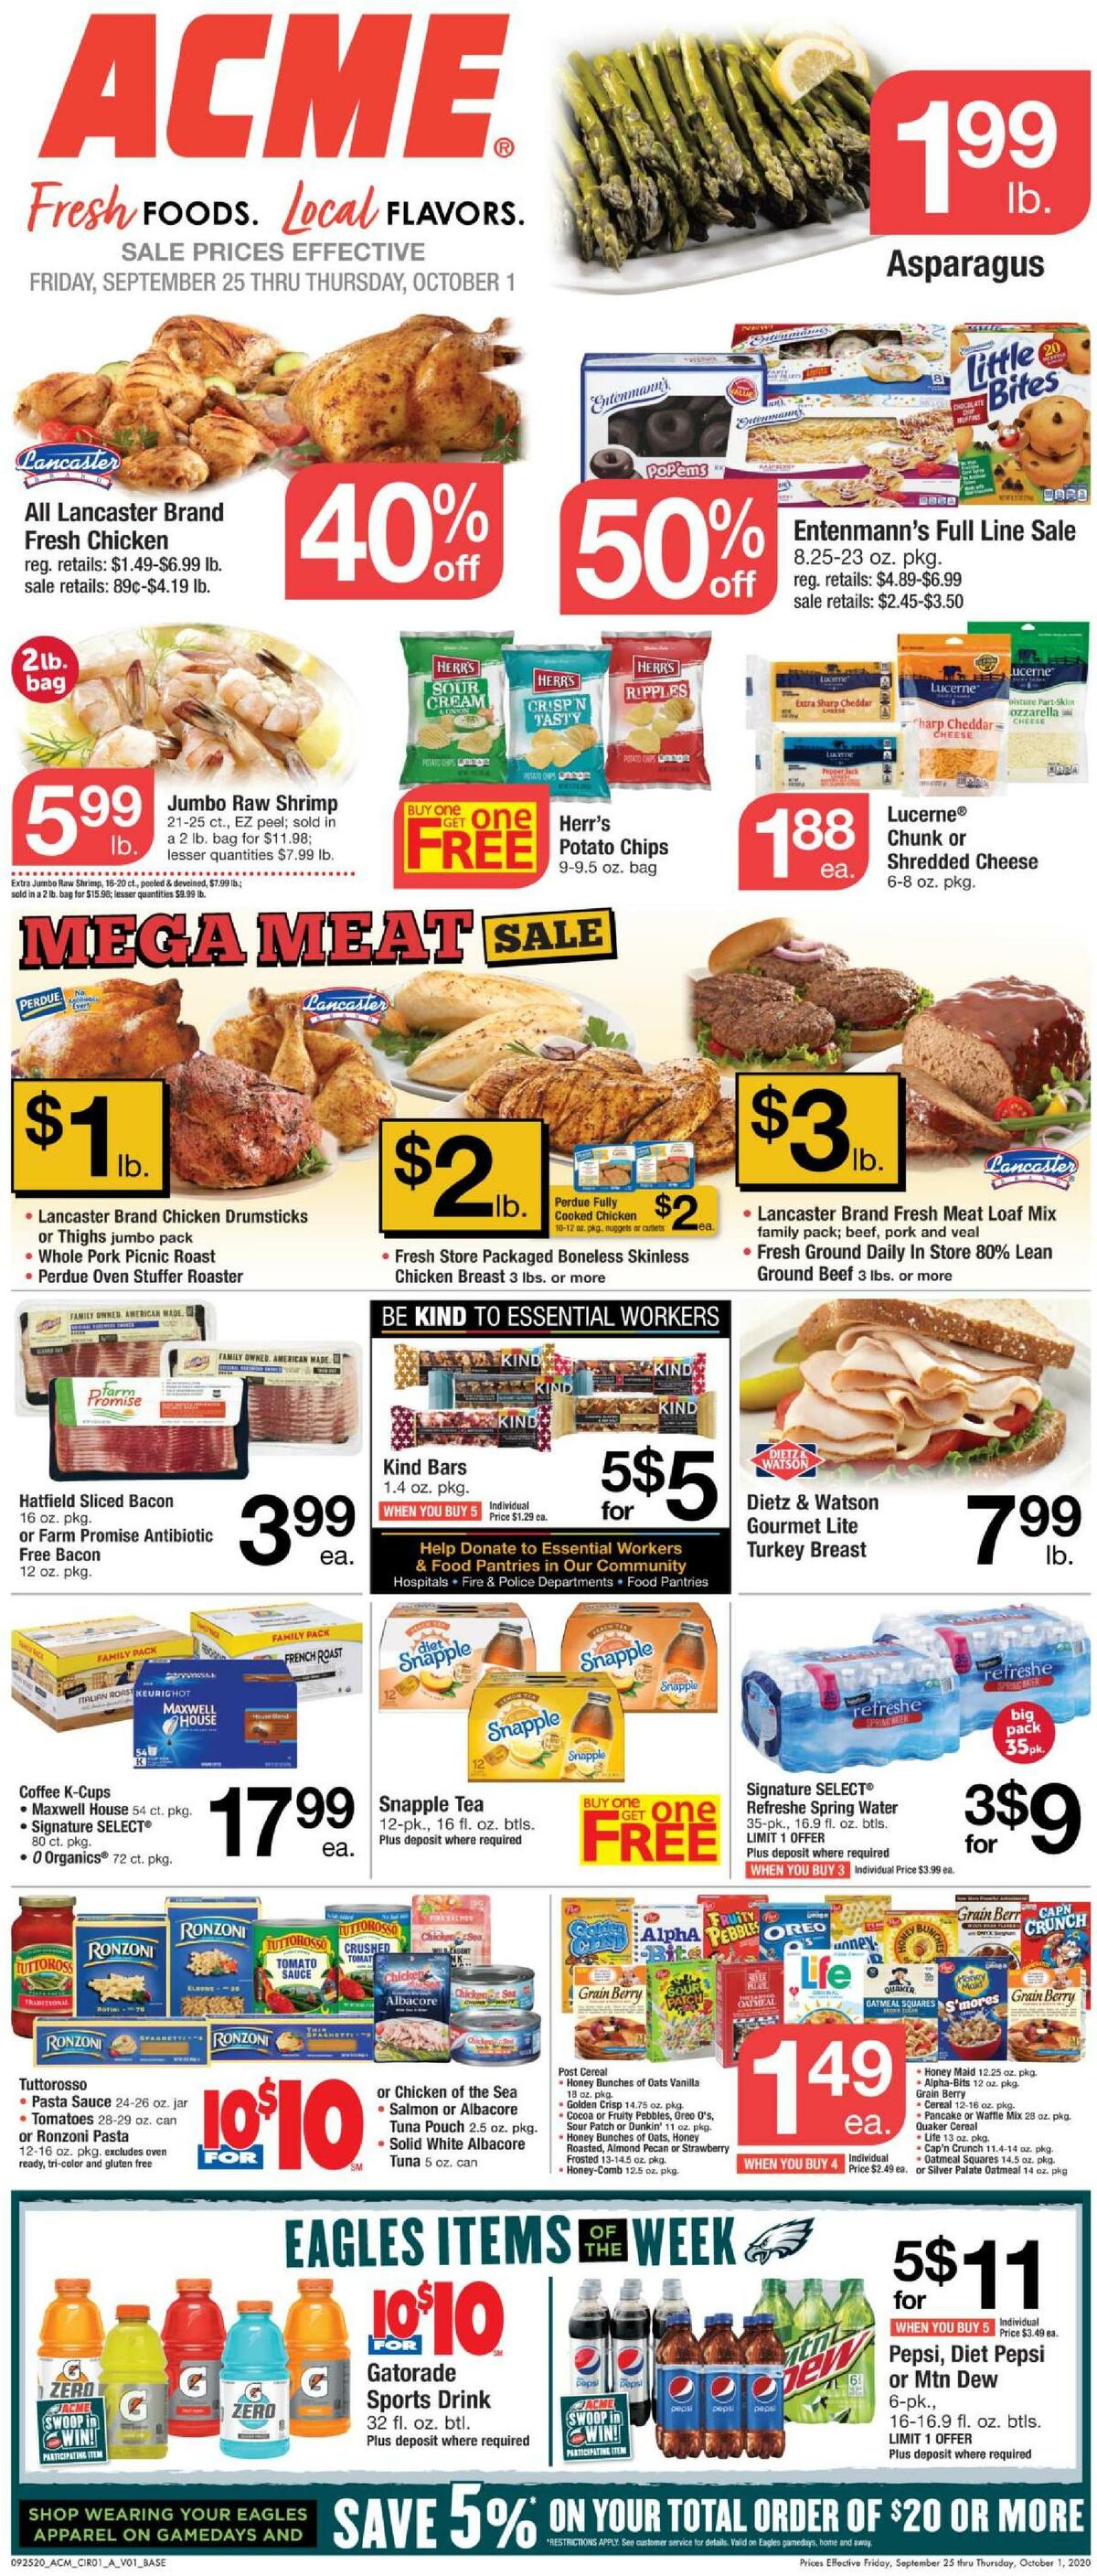 ACME Markets Weekly Ads & Special Buys from September 25